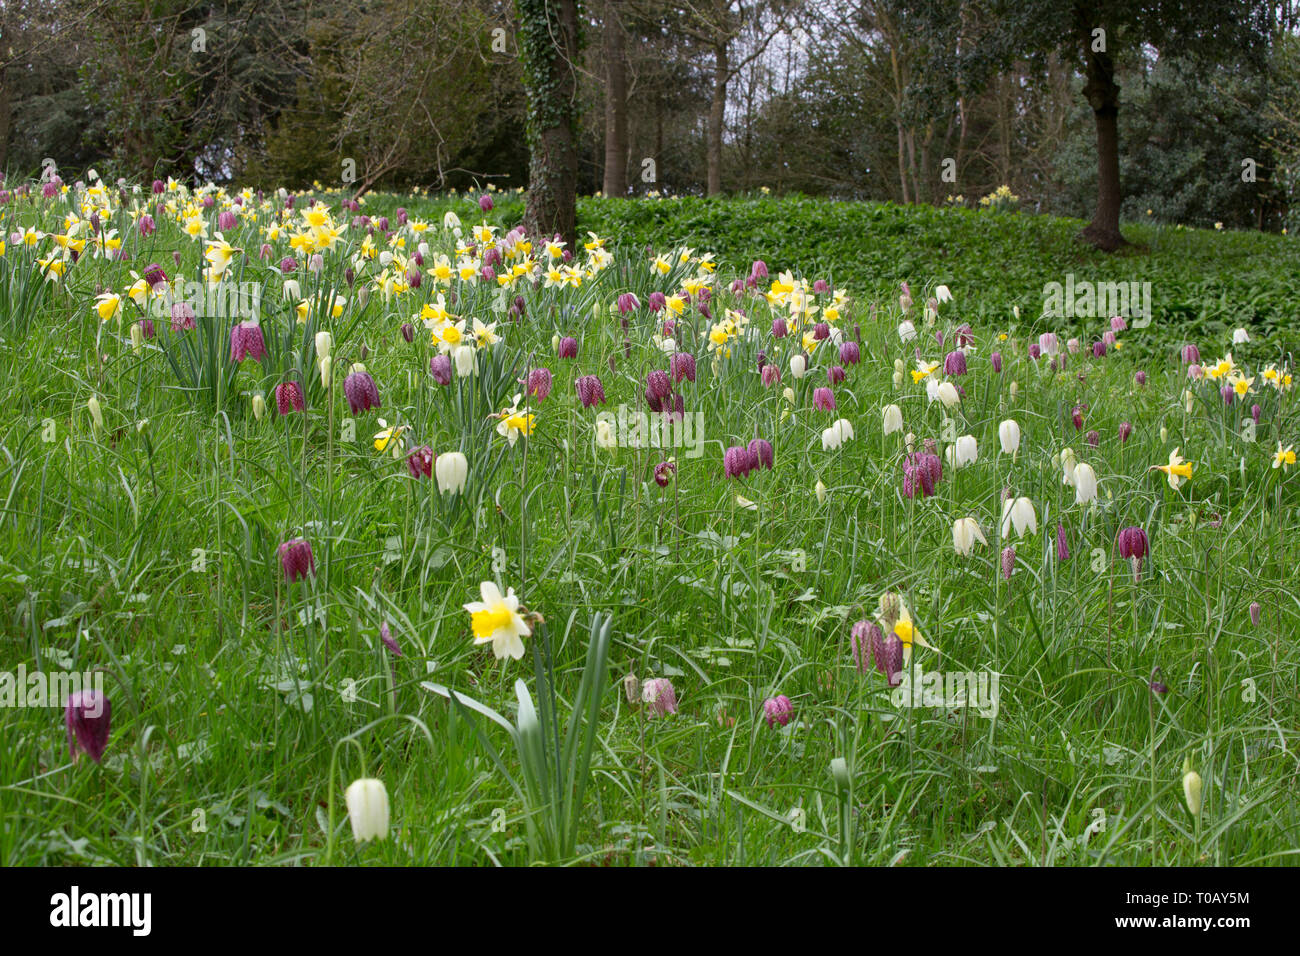 Snake's head Fritillaries, Fritillaria meleagris, growing amongst Wild Daffodils, Narcissus pseudo-narcissus, Madresfield Court, Worcestershire, UK Stock Photo